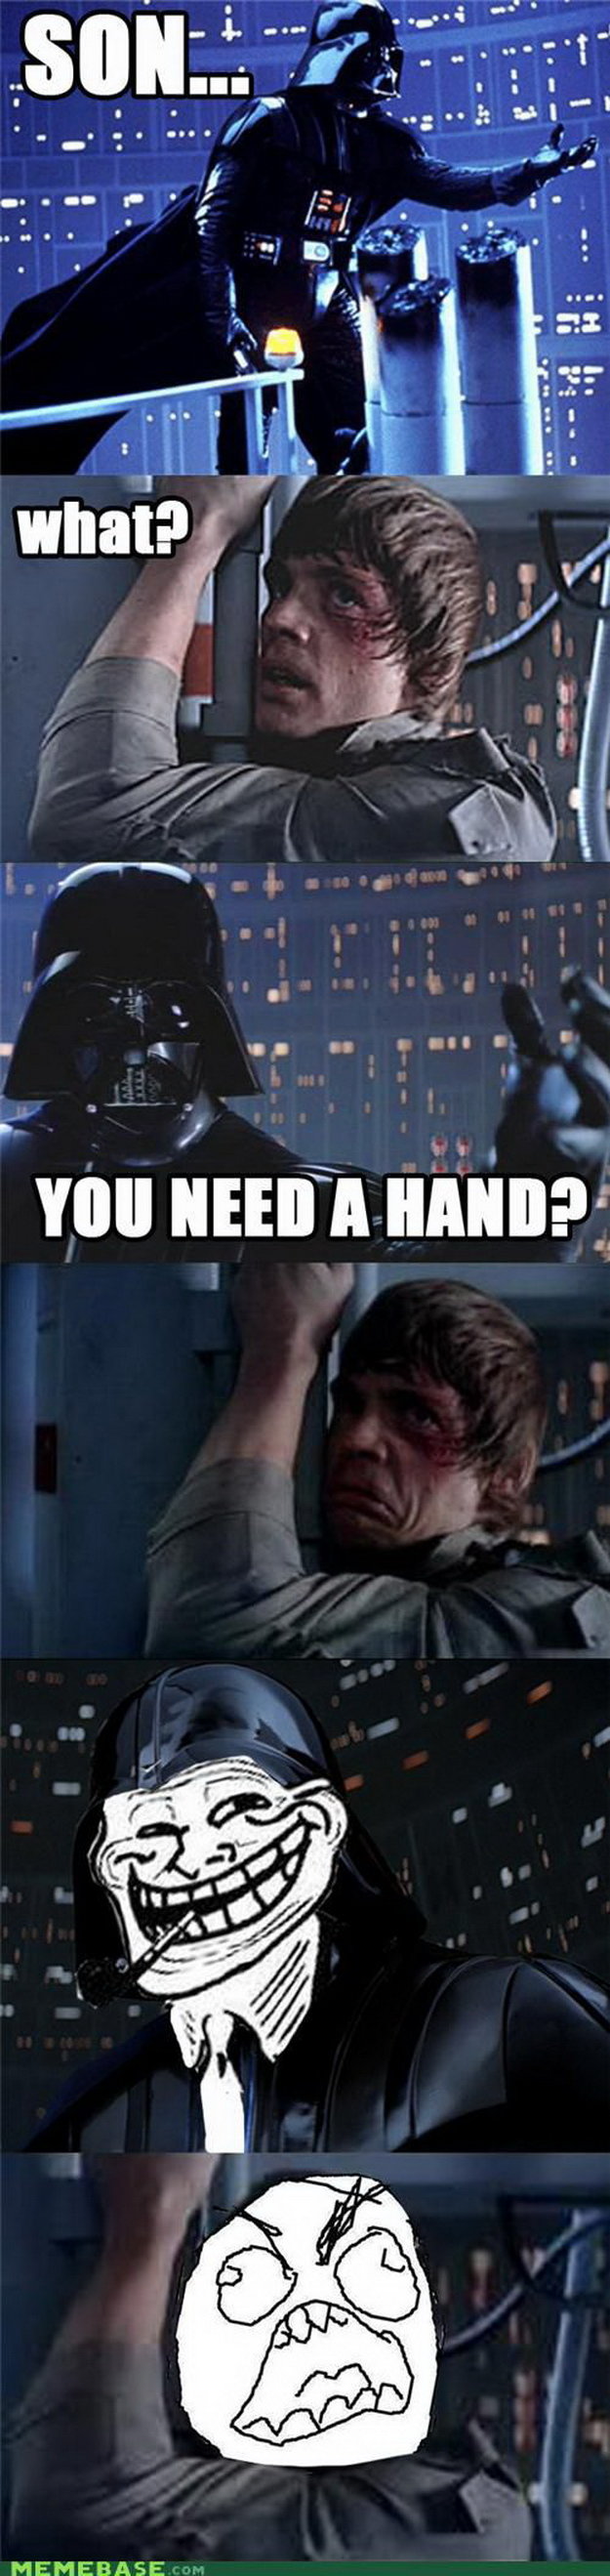 Troll vader. Note: vader means father in dutch. MEMEBASE